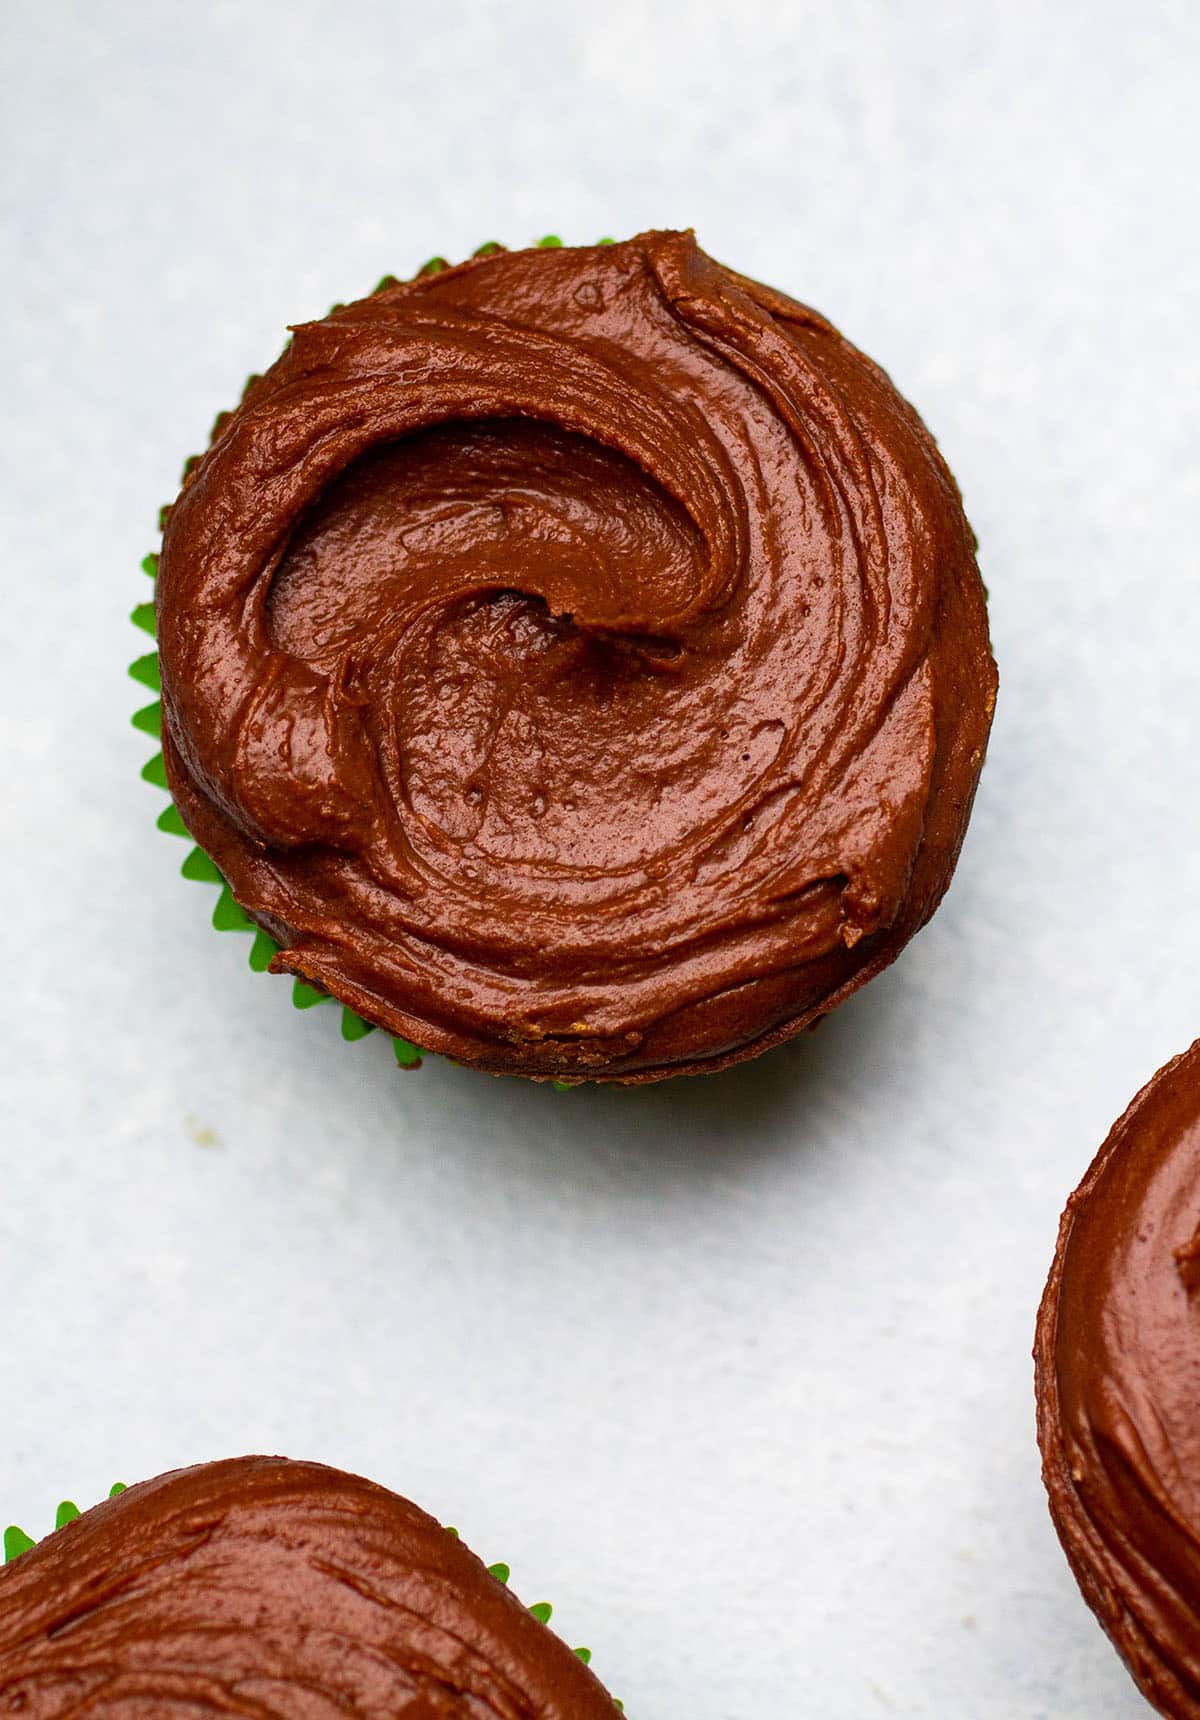 Three cupcakes topped with chocolate frosting on a white table.